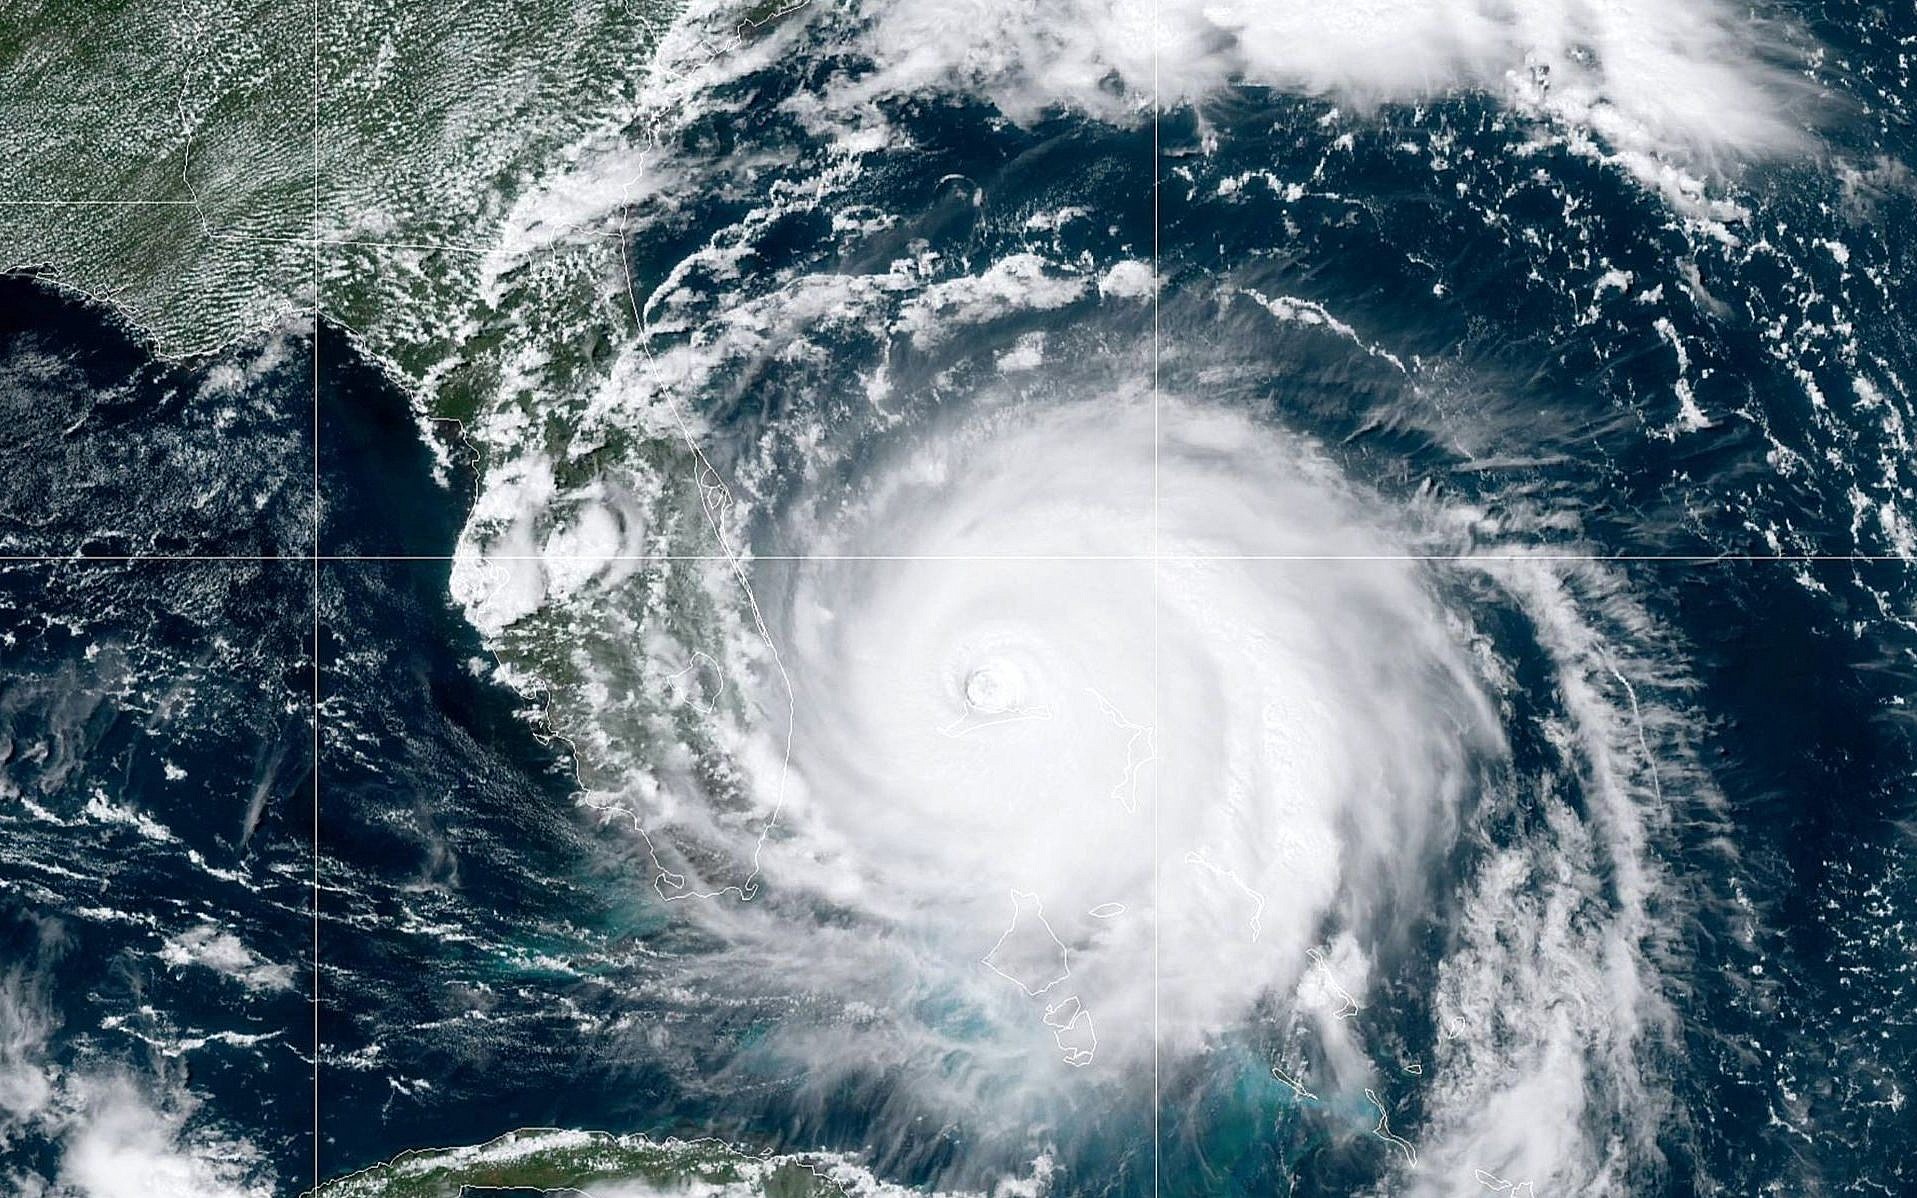 Hurricane makes its way to Florida as Jewish agencies prepare to help community | The Times of